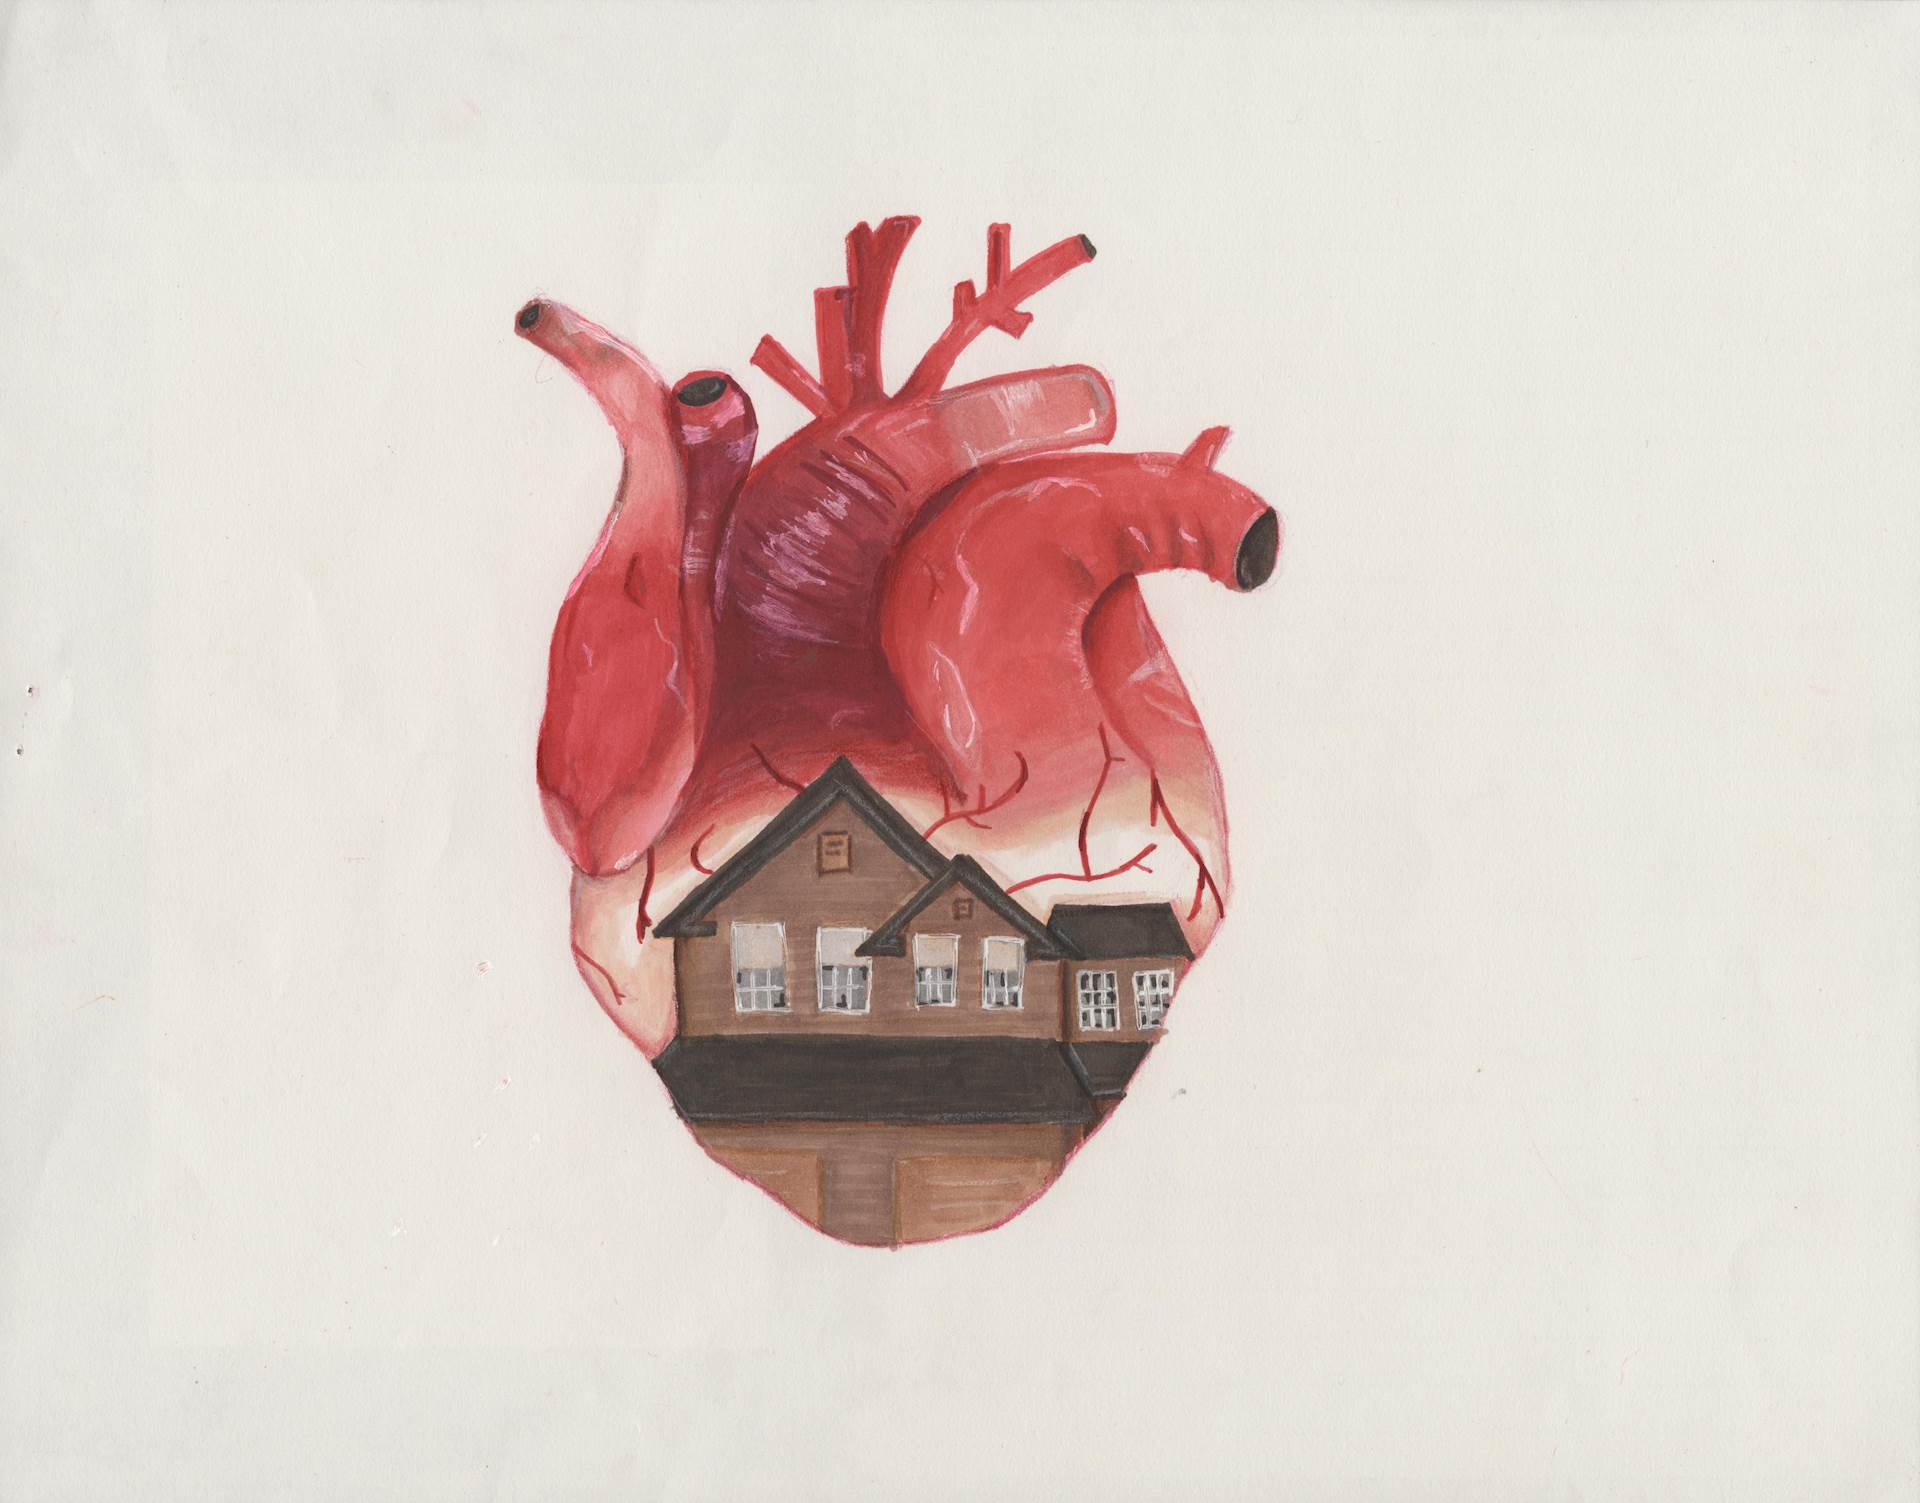 Drawing of a human heart with a house inside